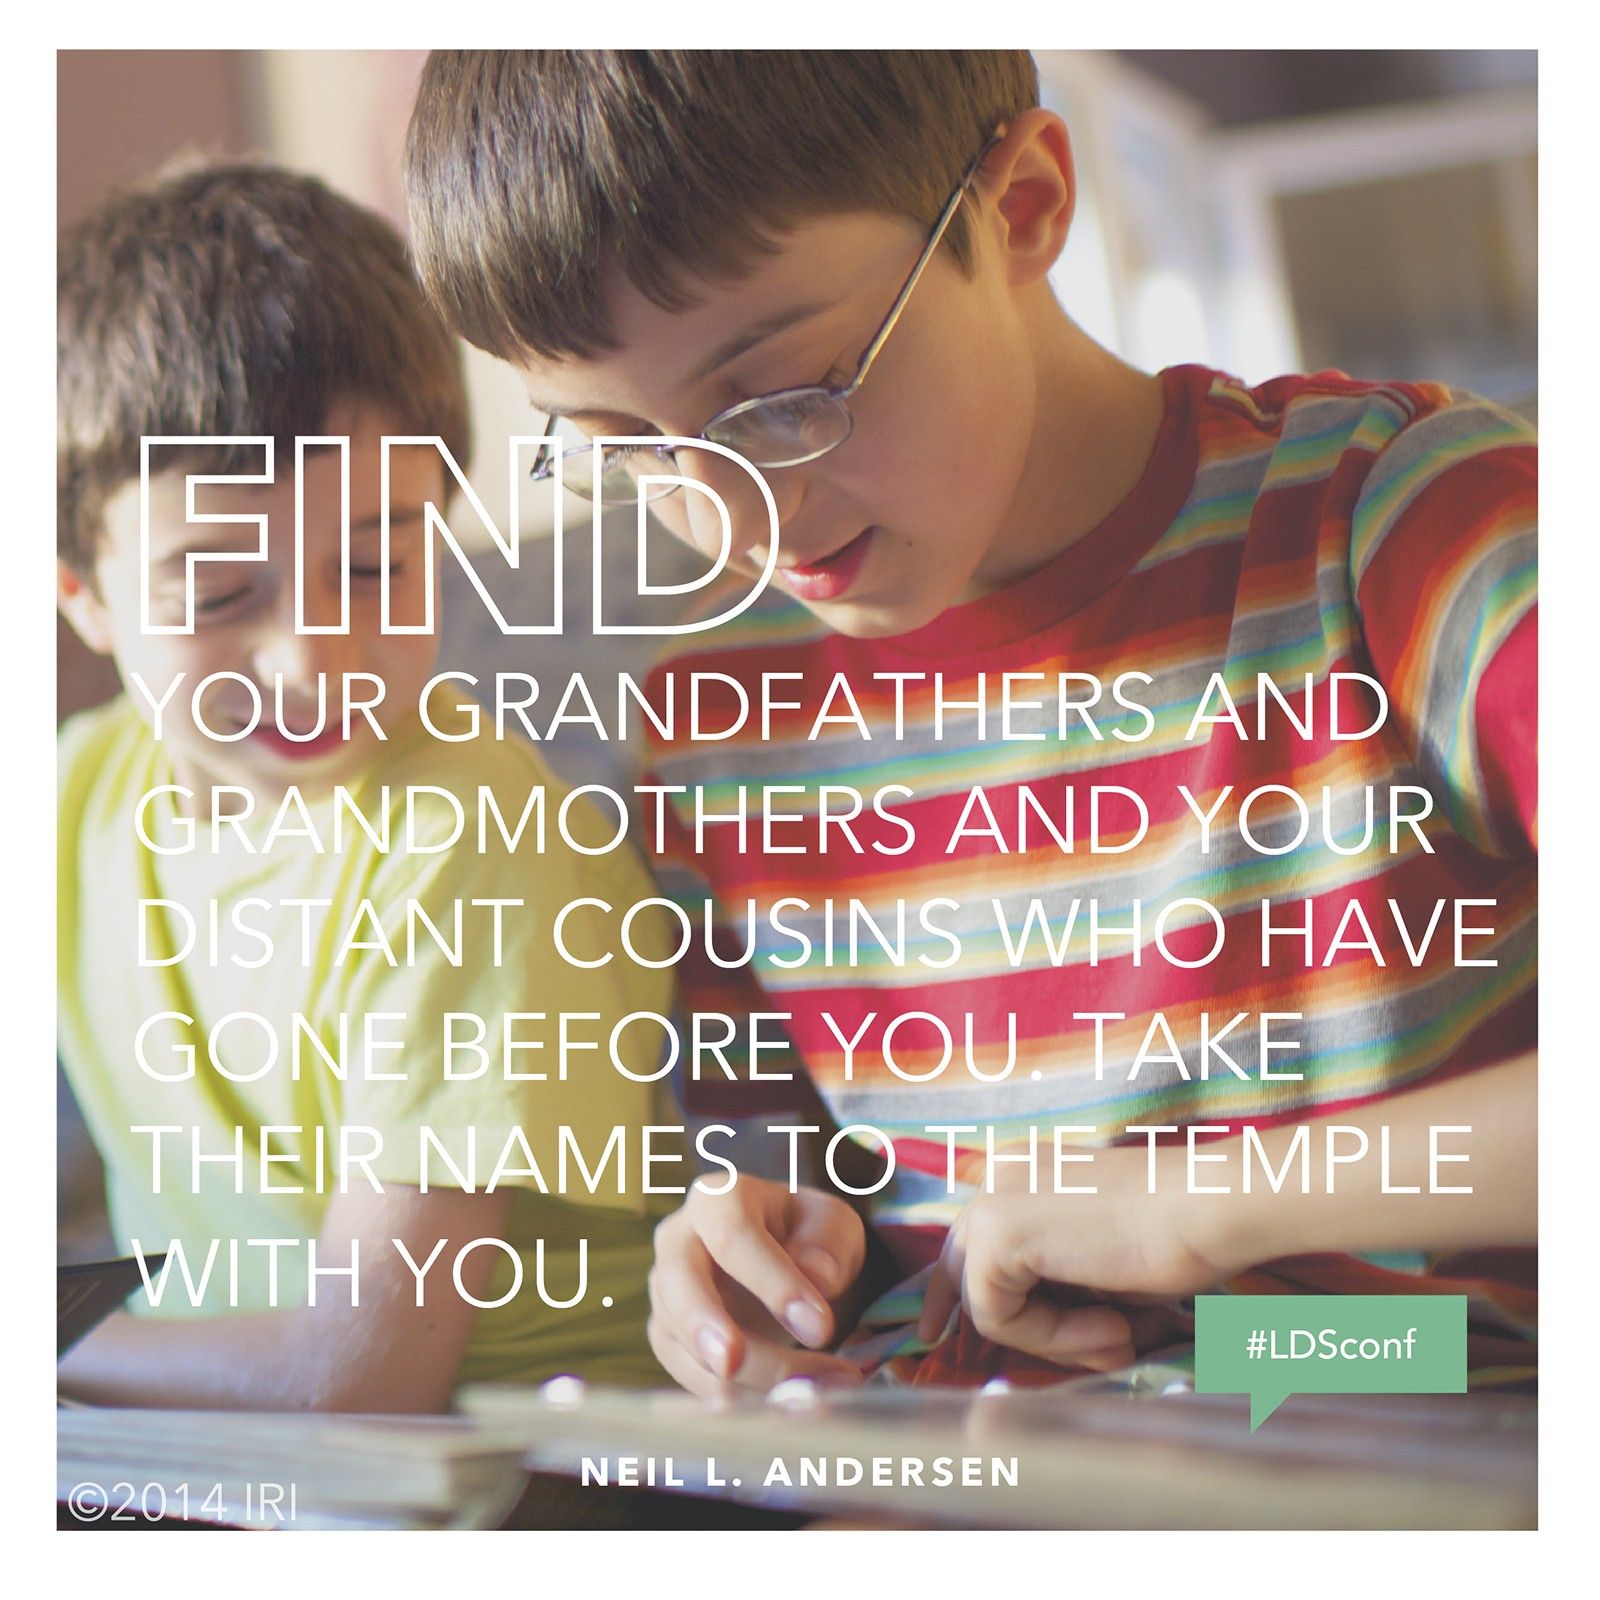 “Find your grandfathers and grandmothers and your distant cousins who have gone before you. Take their names to the temple with you.”—Elder Neil L. Andersen, “Spiritual Whirlwinds”